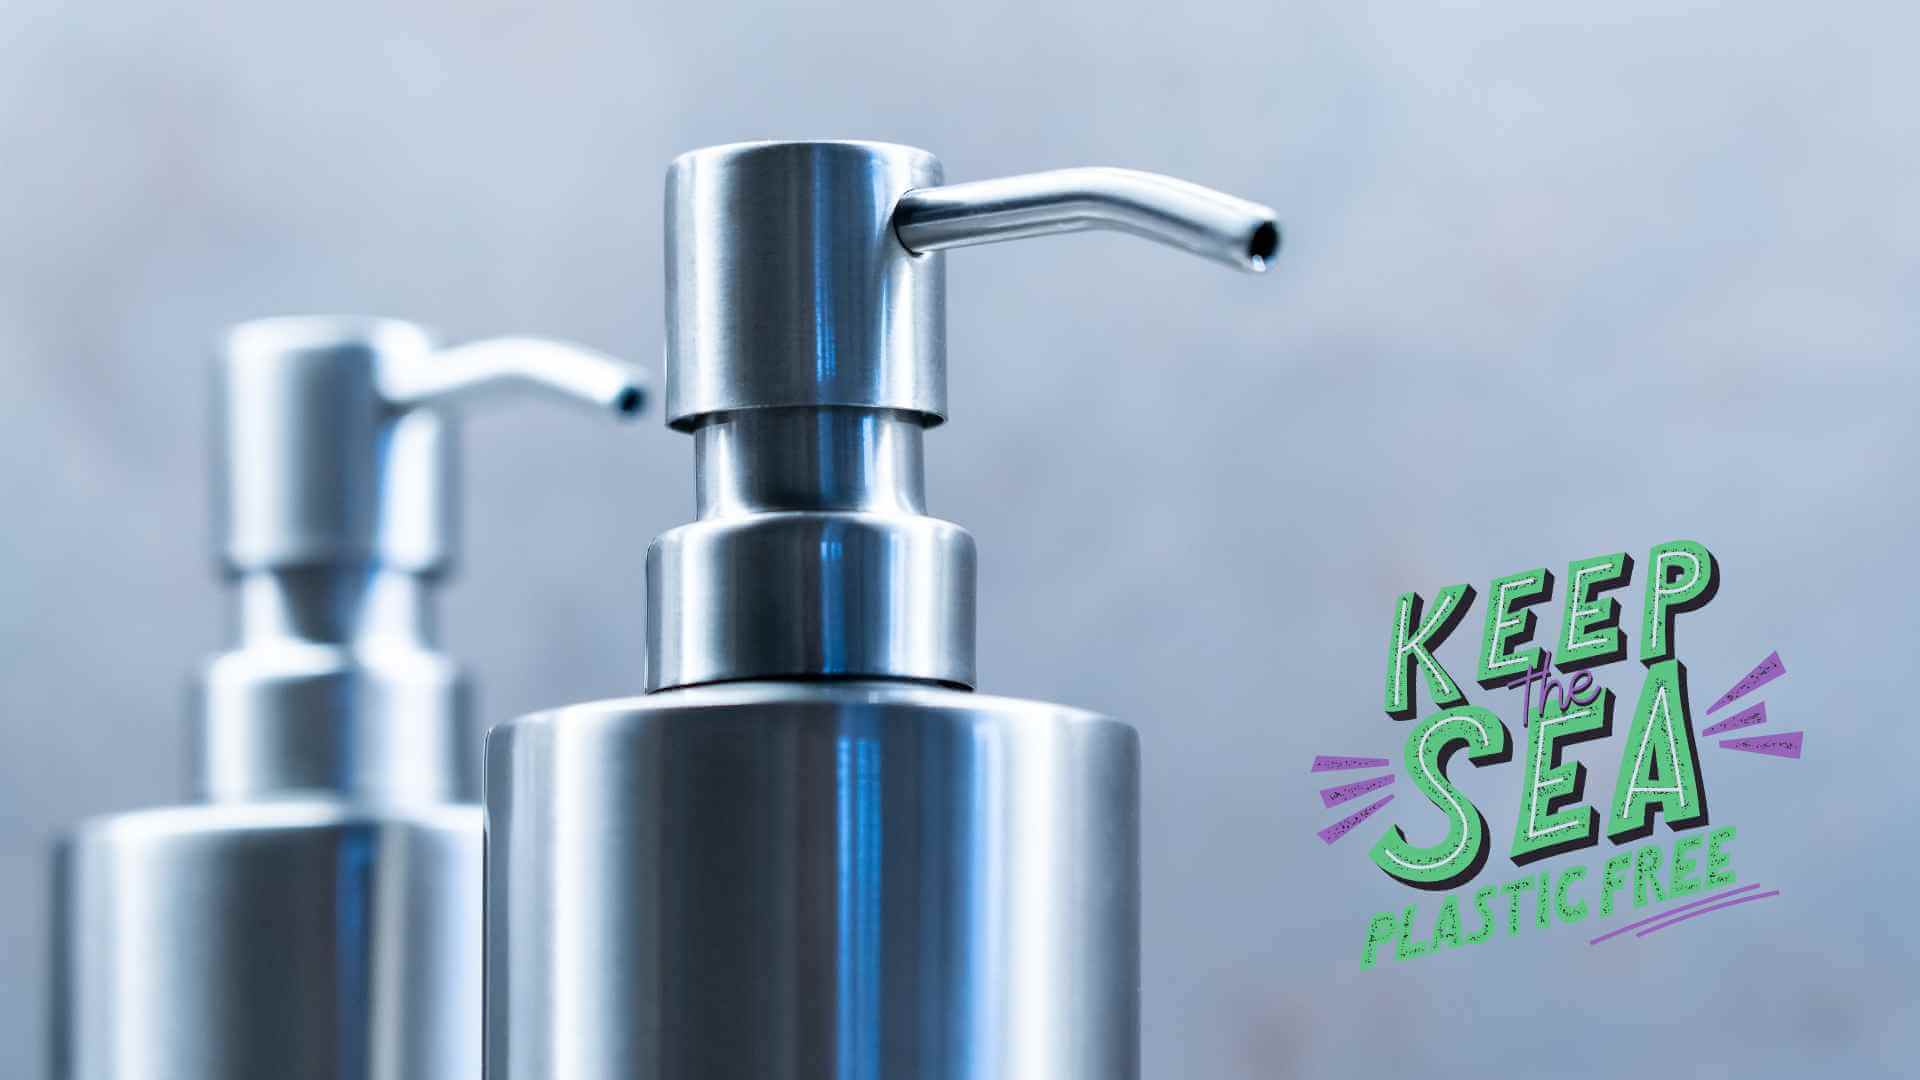 Laundry Soap Dispenser - Waste Free Products